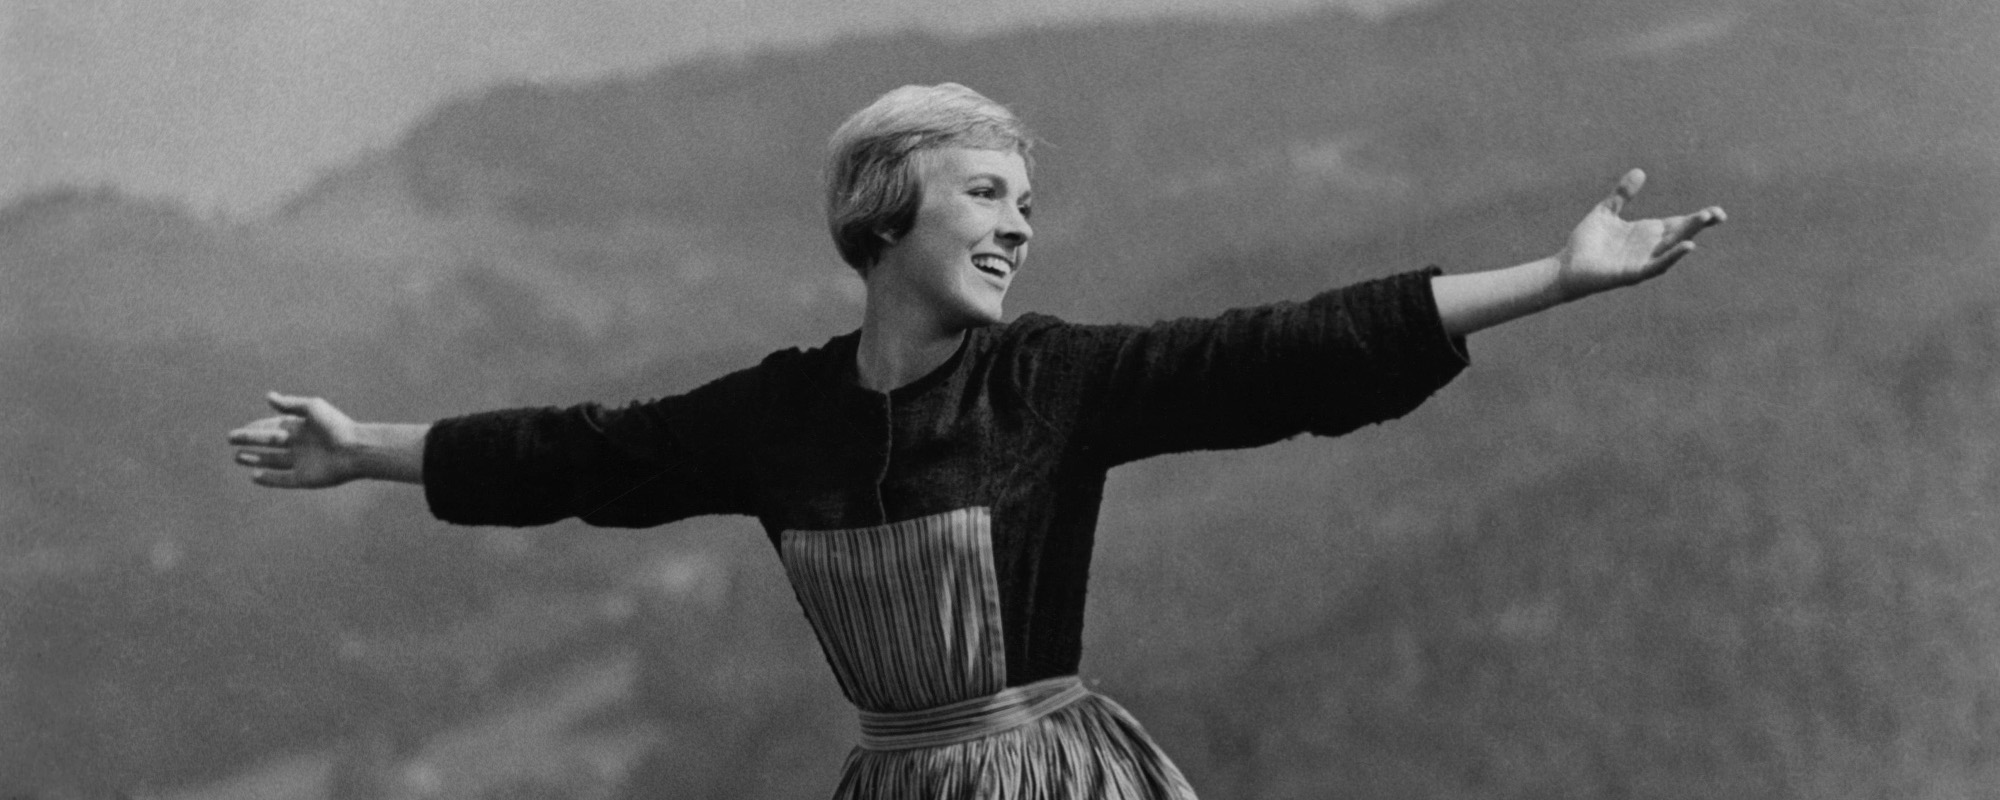 Who Wrote the Cheerful Classic, “My Favorite Things,” from ‘The Sound of Music’